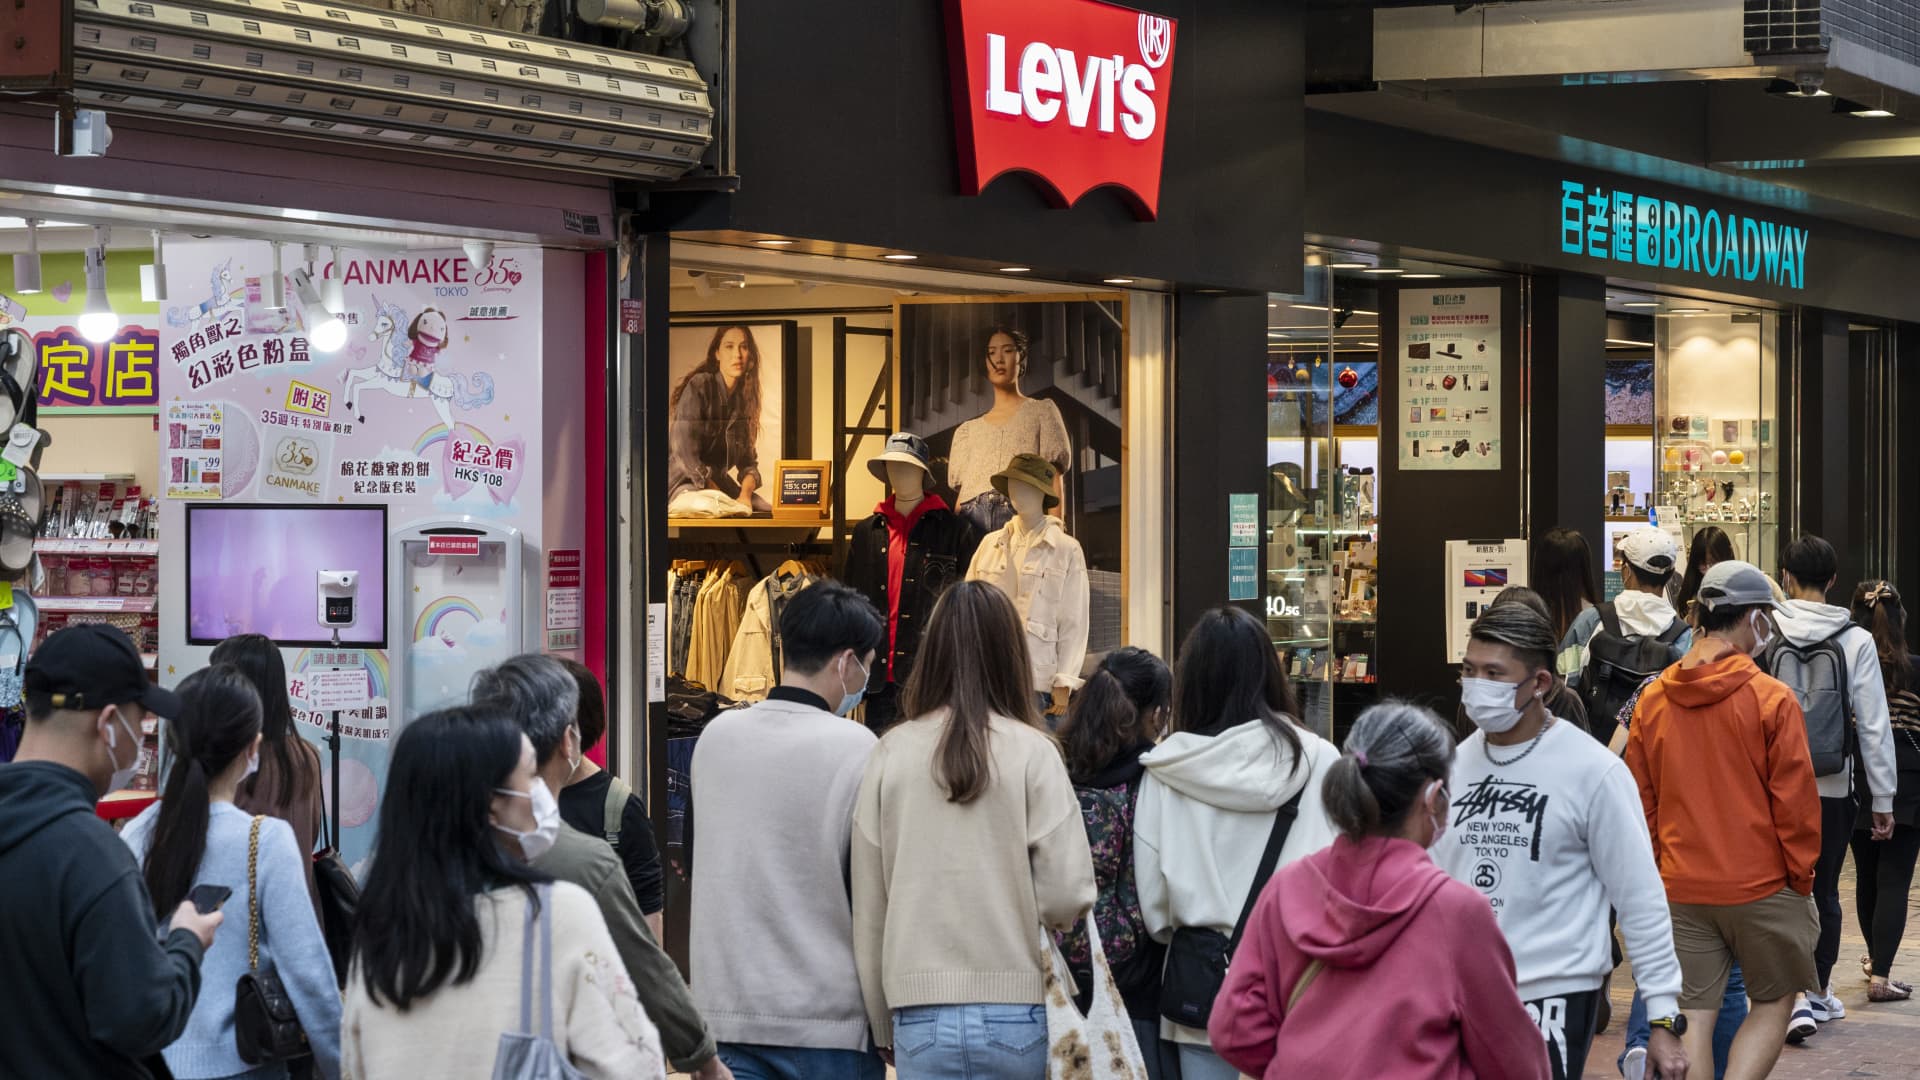 Michelle Gass will replace Chip Berg as CEO of Levi Strauss in January